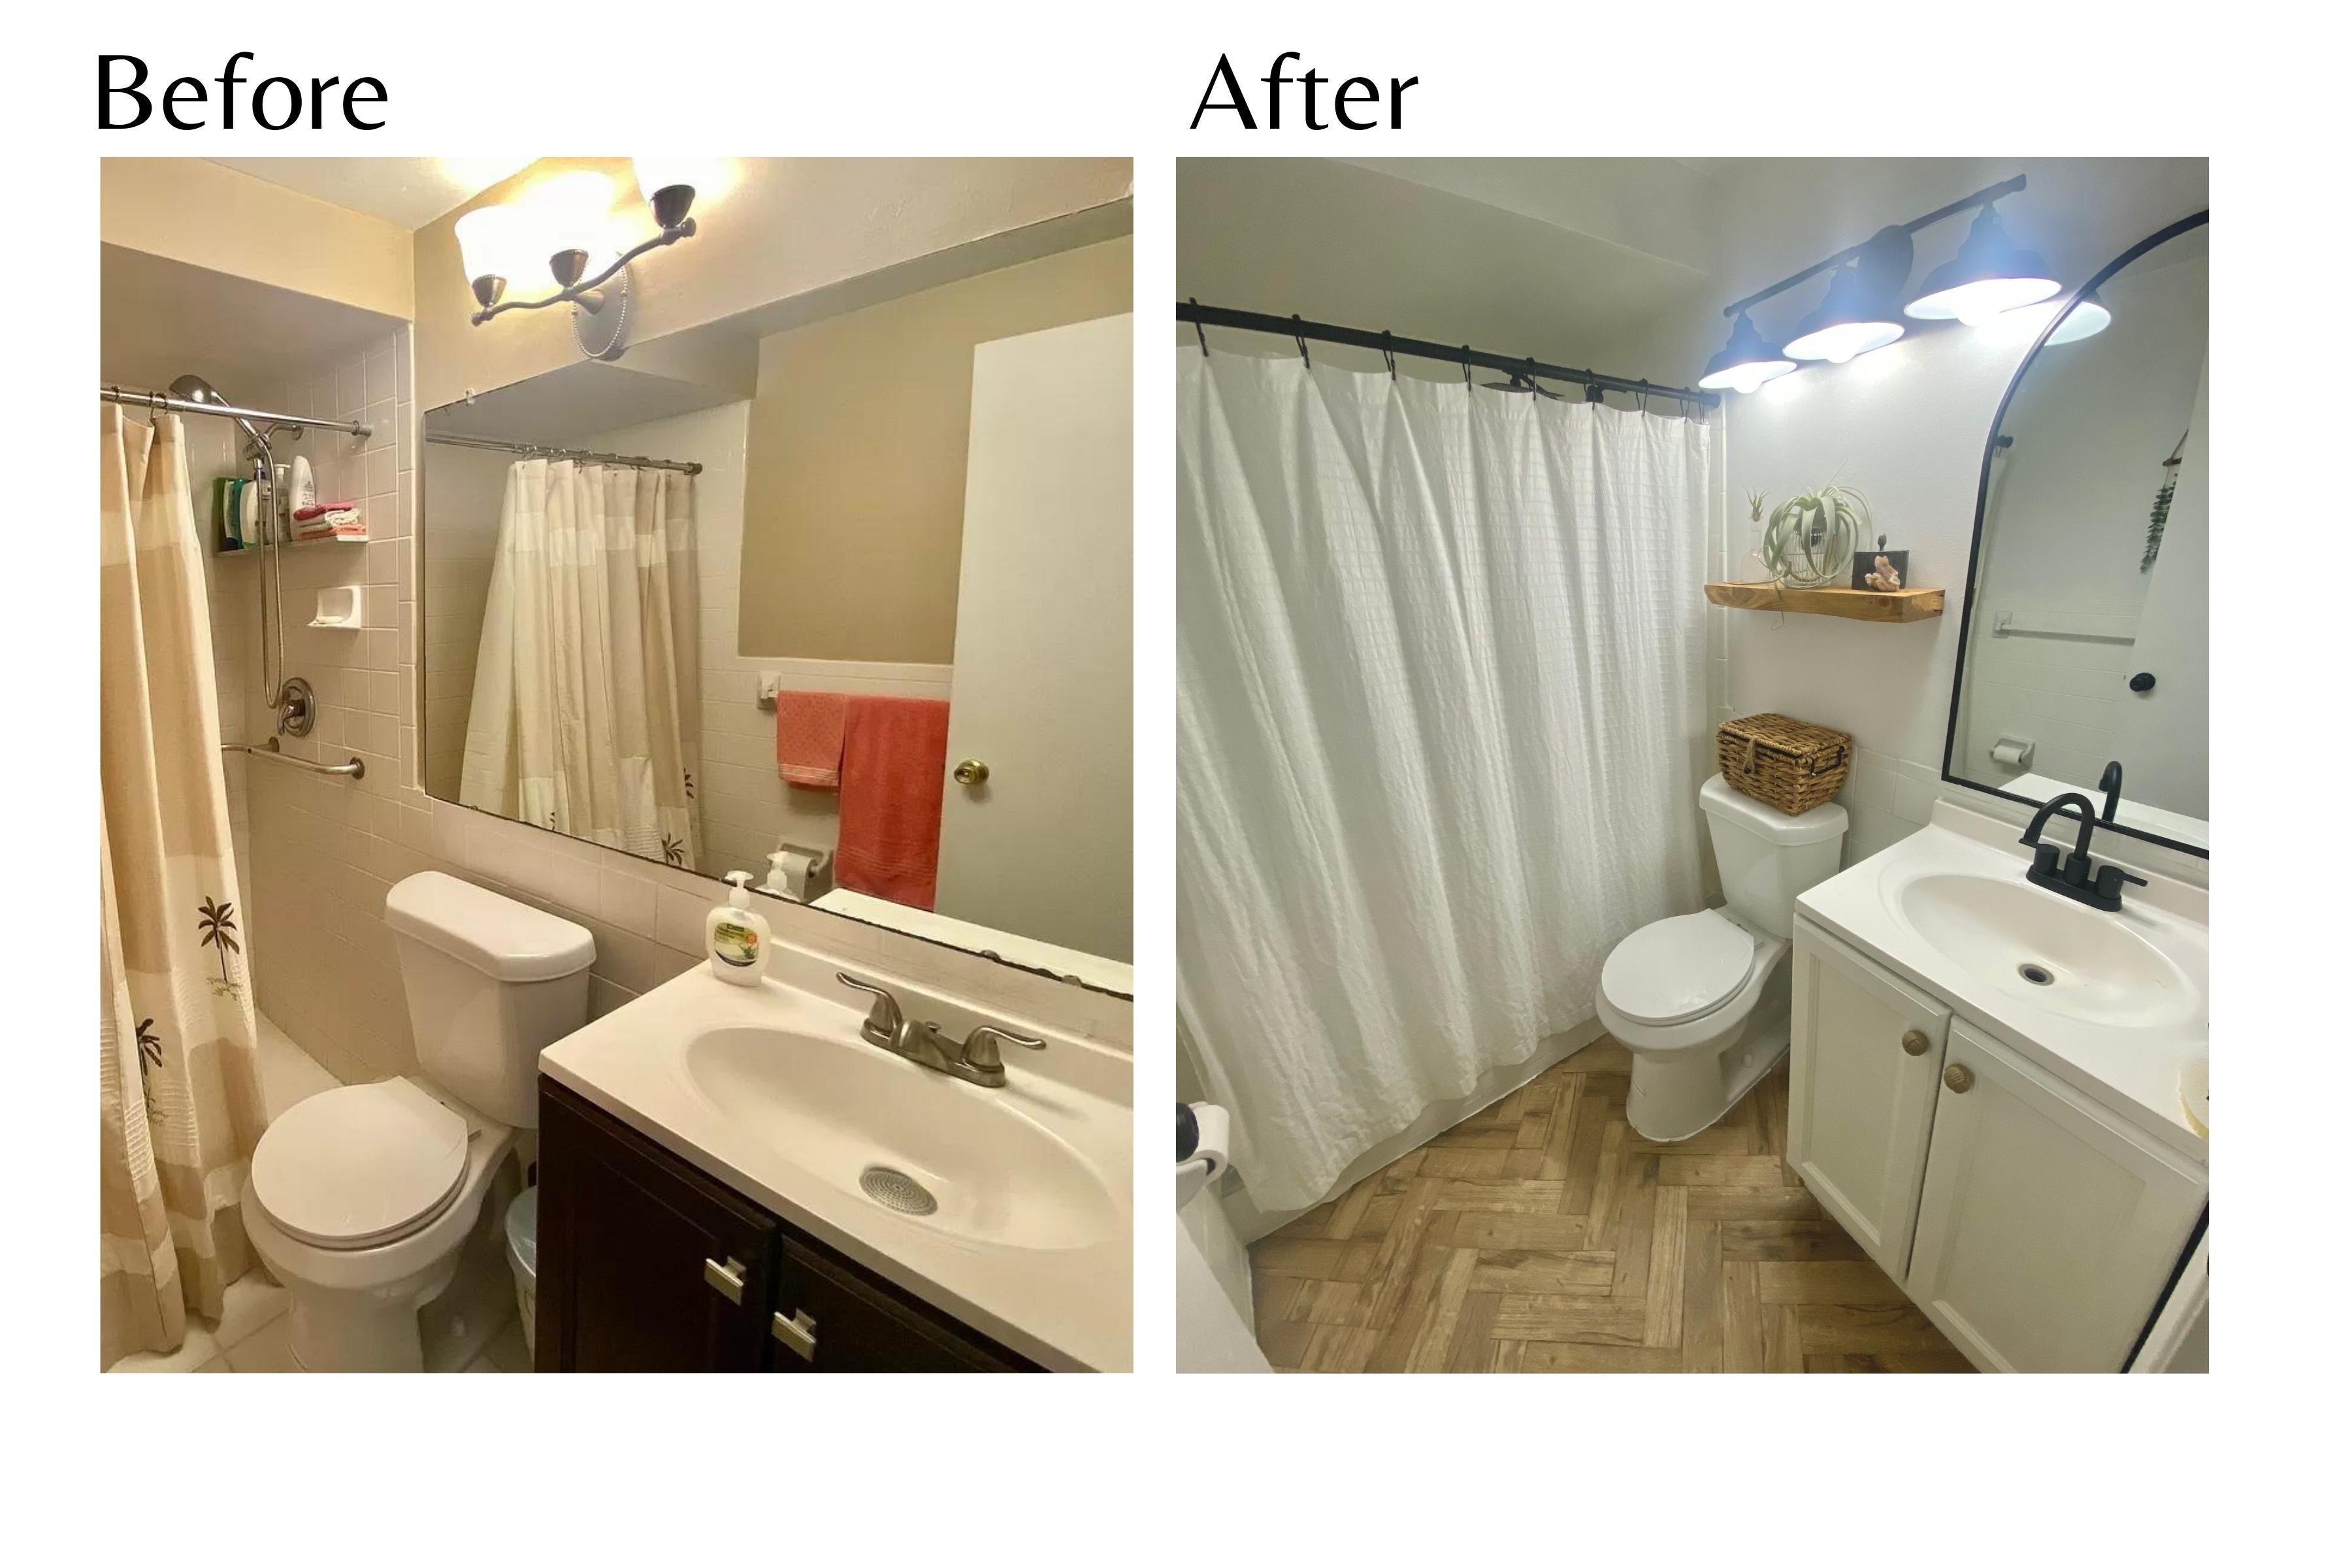 Before and after photos of a bathroom with a dated mirror and the after photo with painted vanity, new mirror and open shelving above toilet